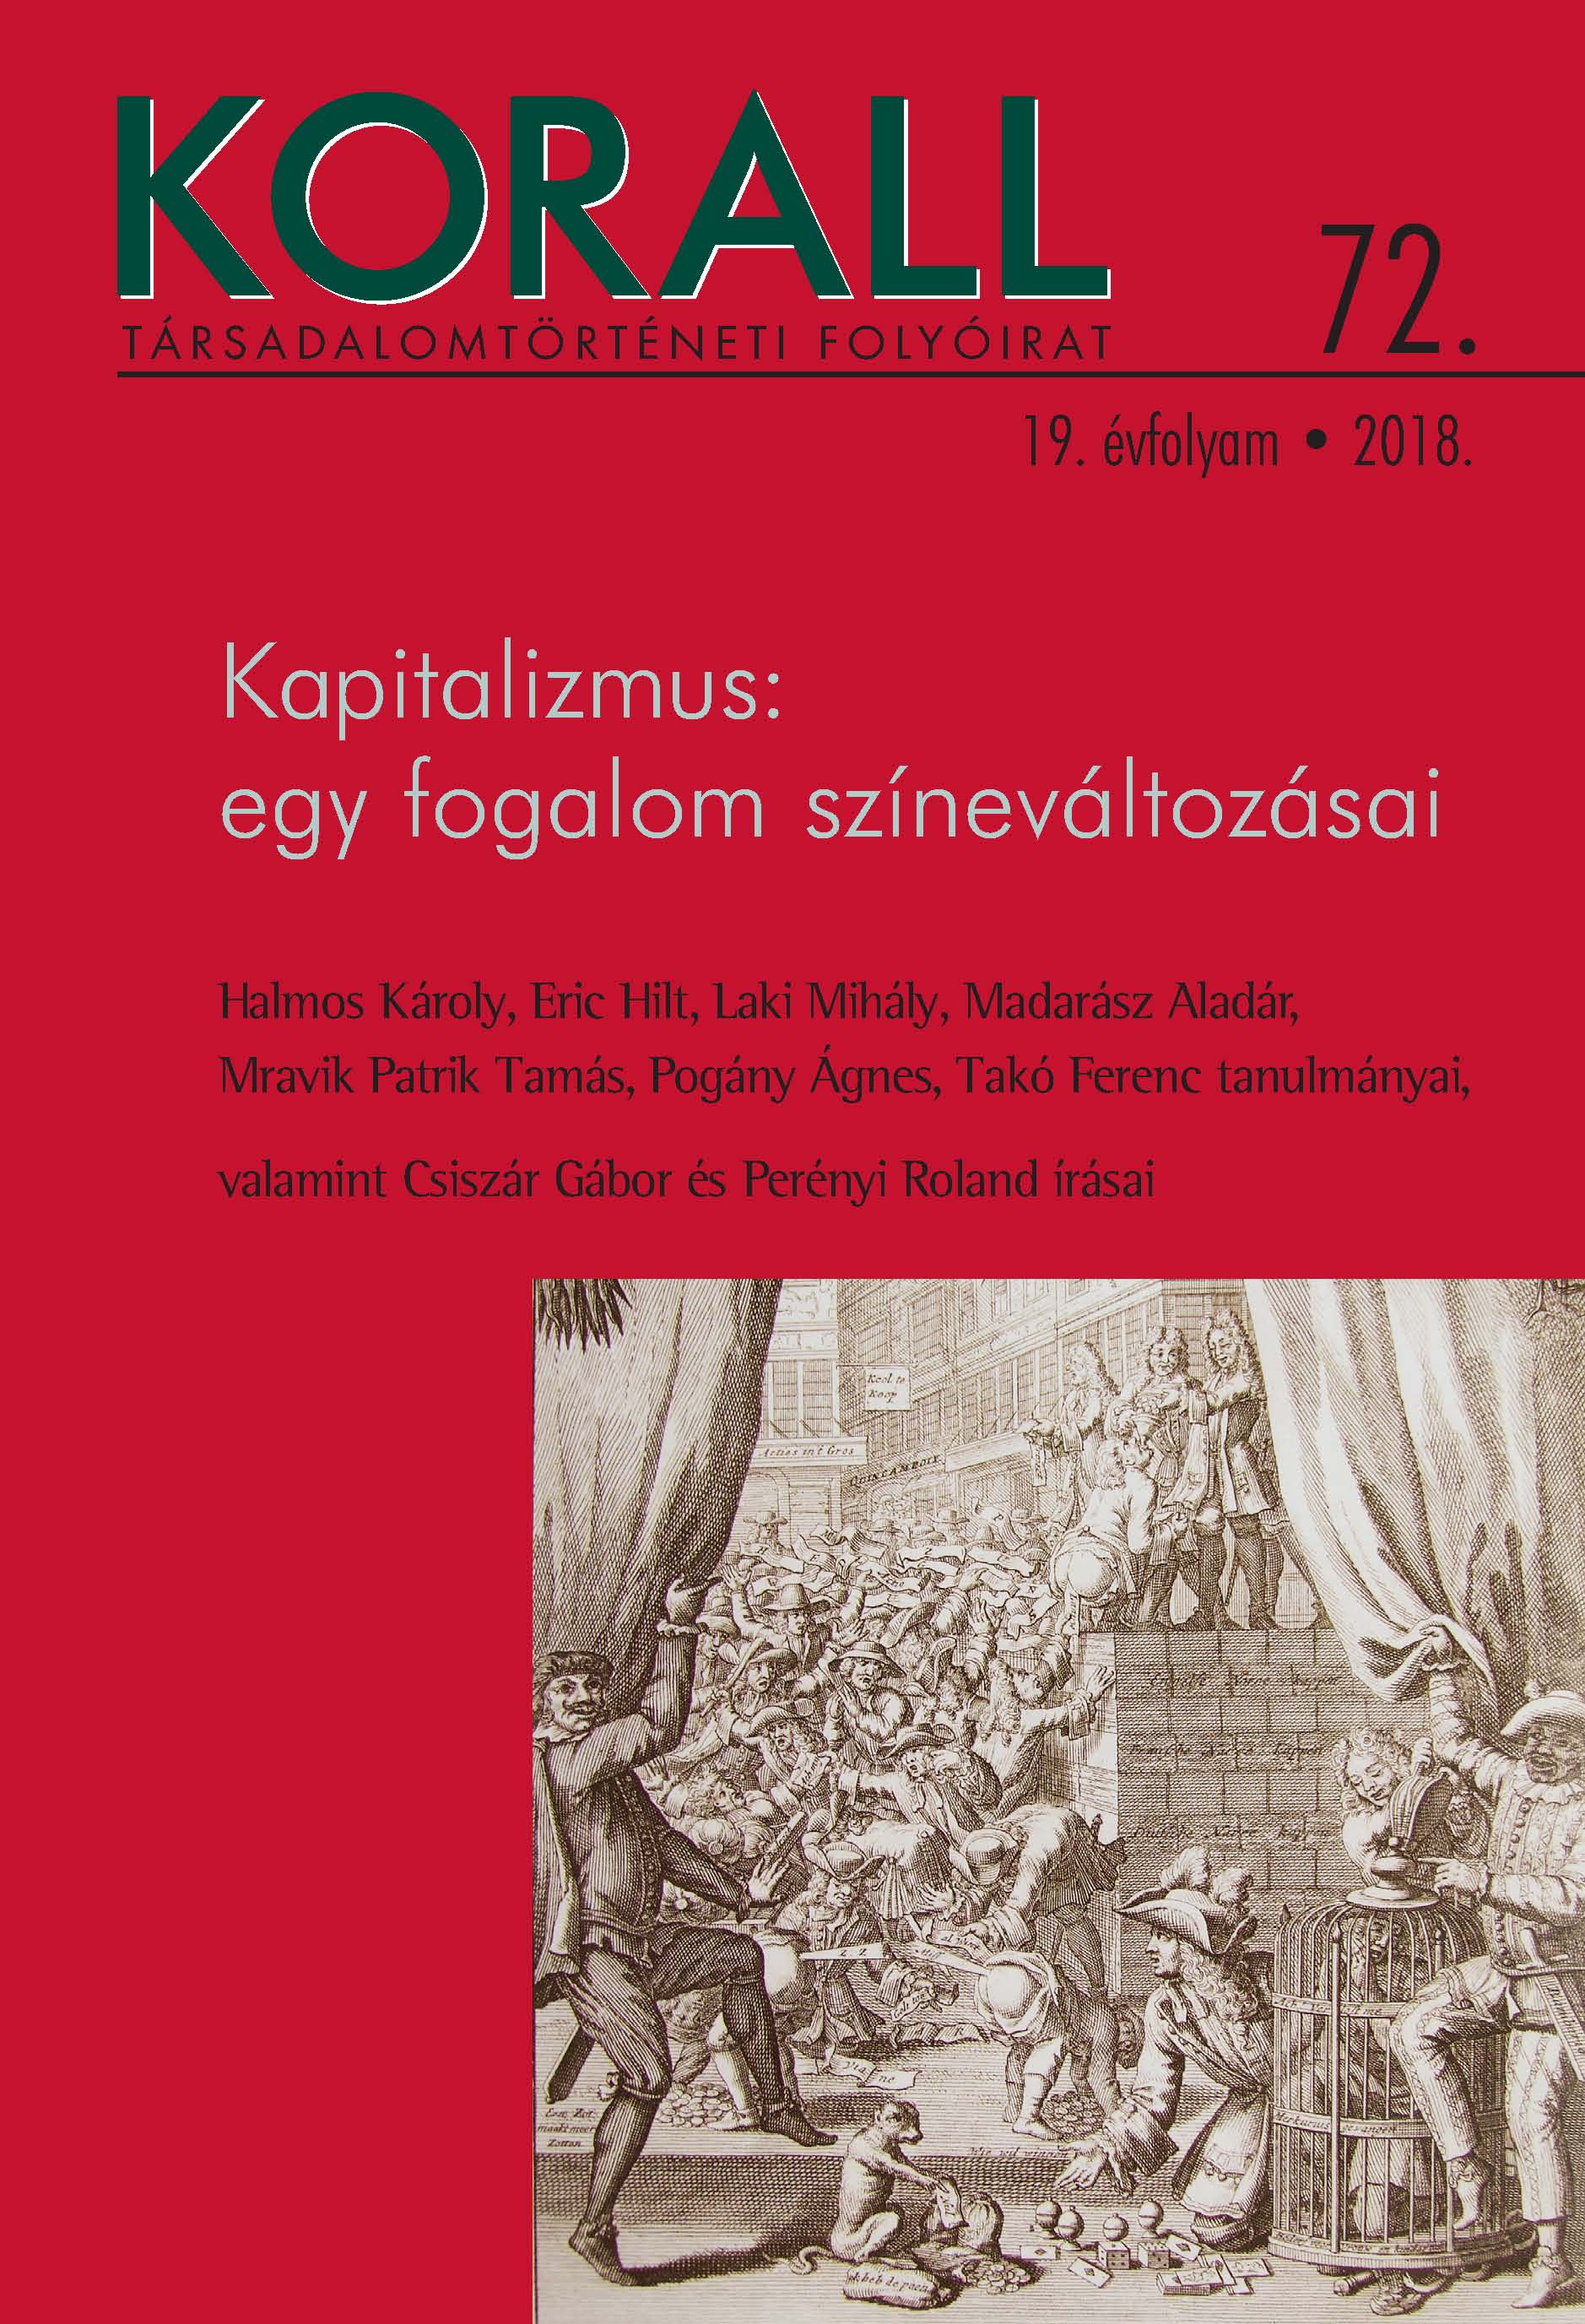 László Kontler – Mark Somos (eds): Trust and Happiness in the History of European Political Thought